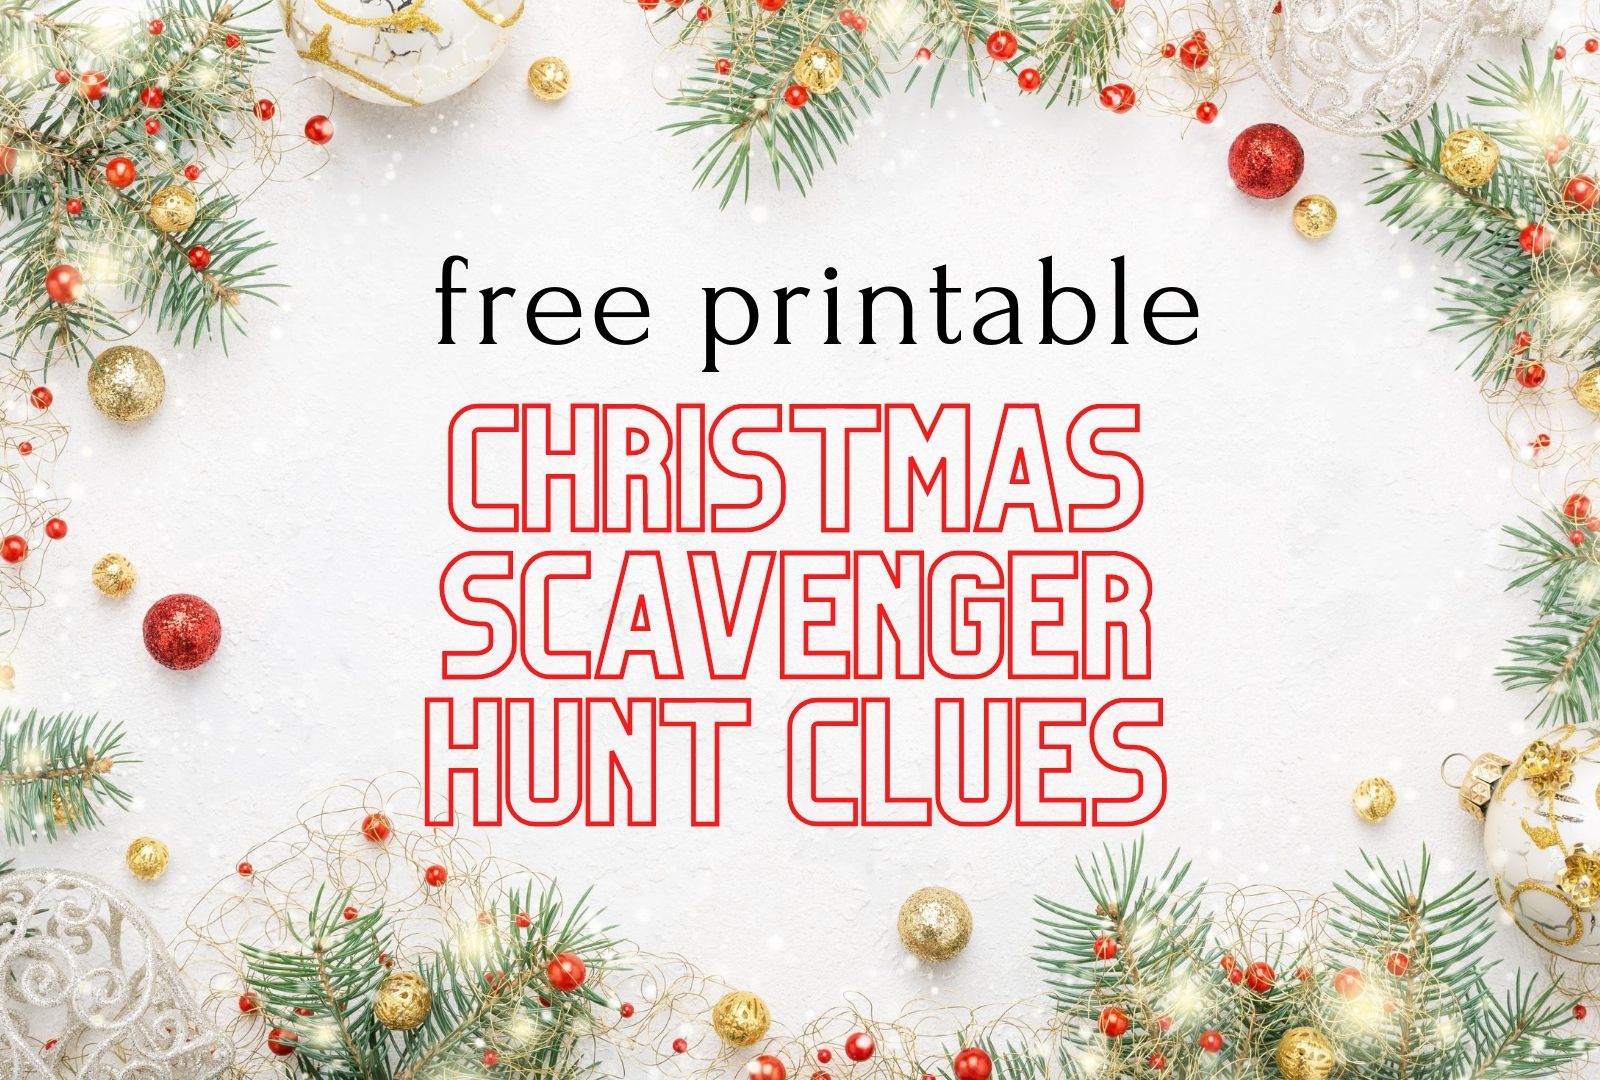 Sign with a Christmas border that reads, "Free Printable Christmas Scavenger Hunt Clues."